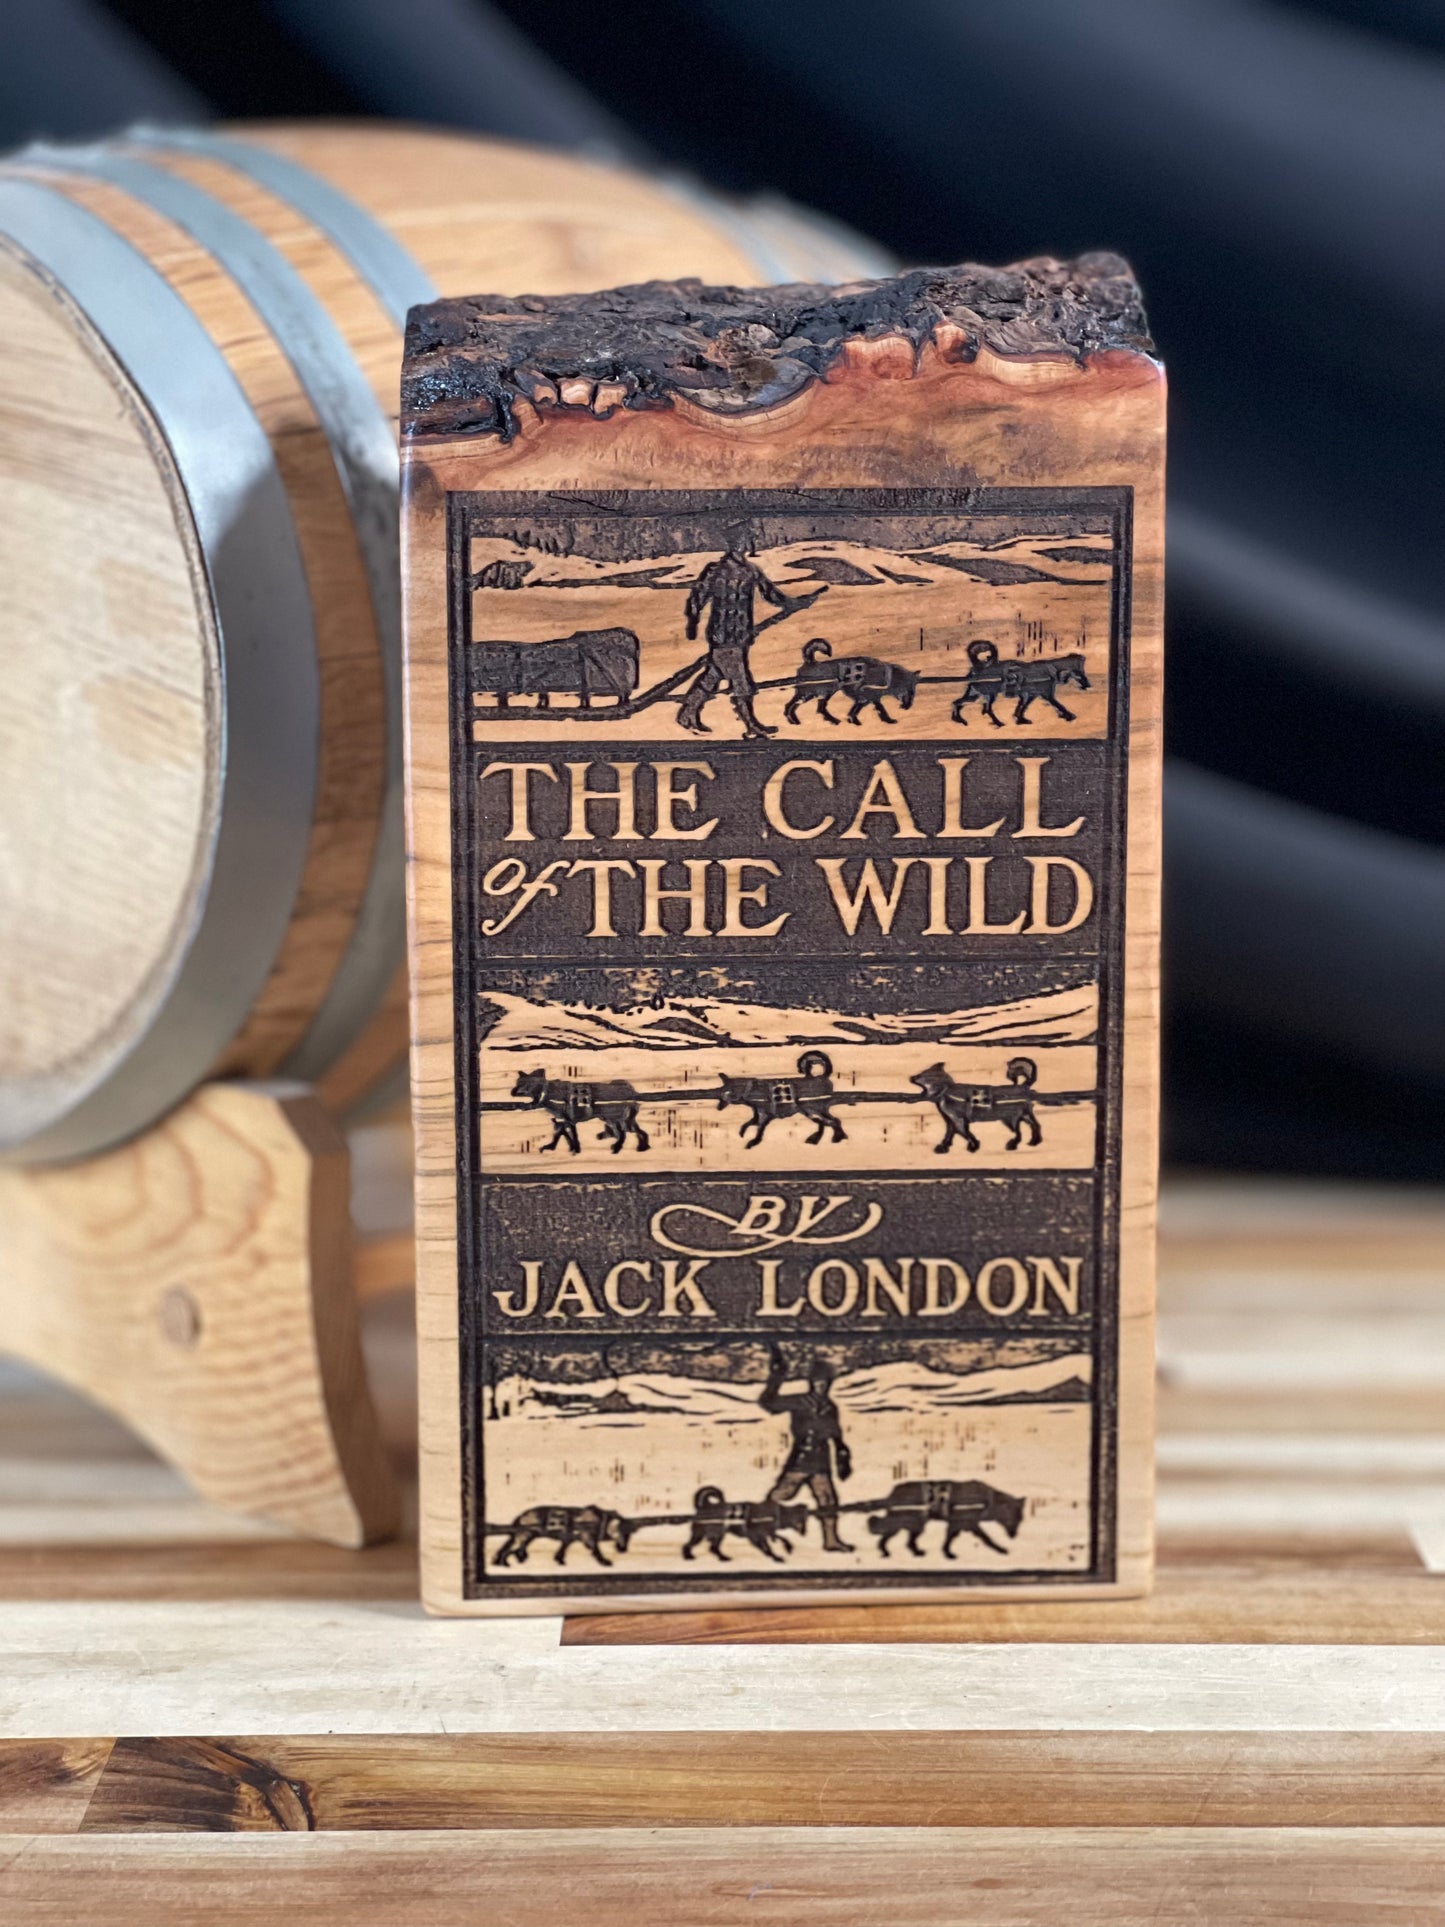 The call of the wild – book cover